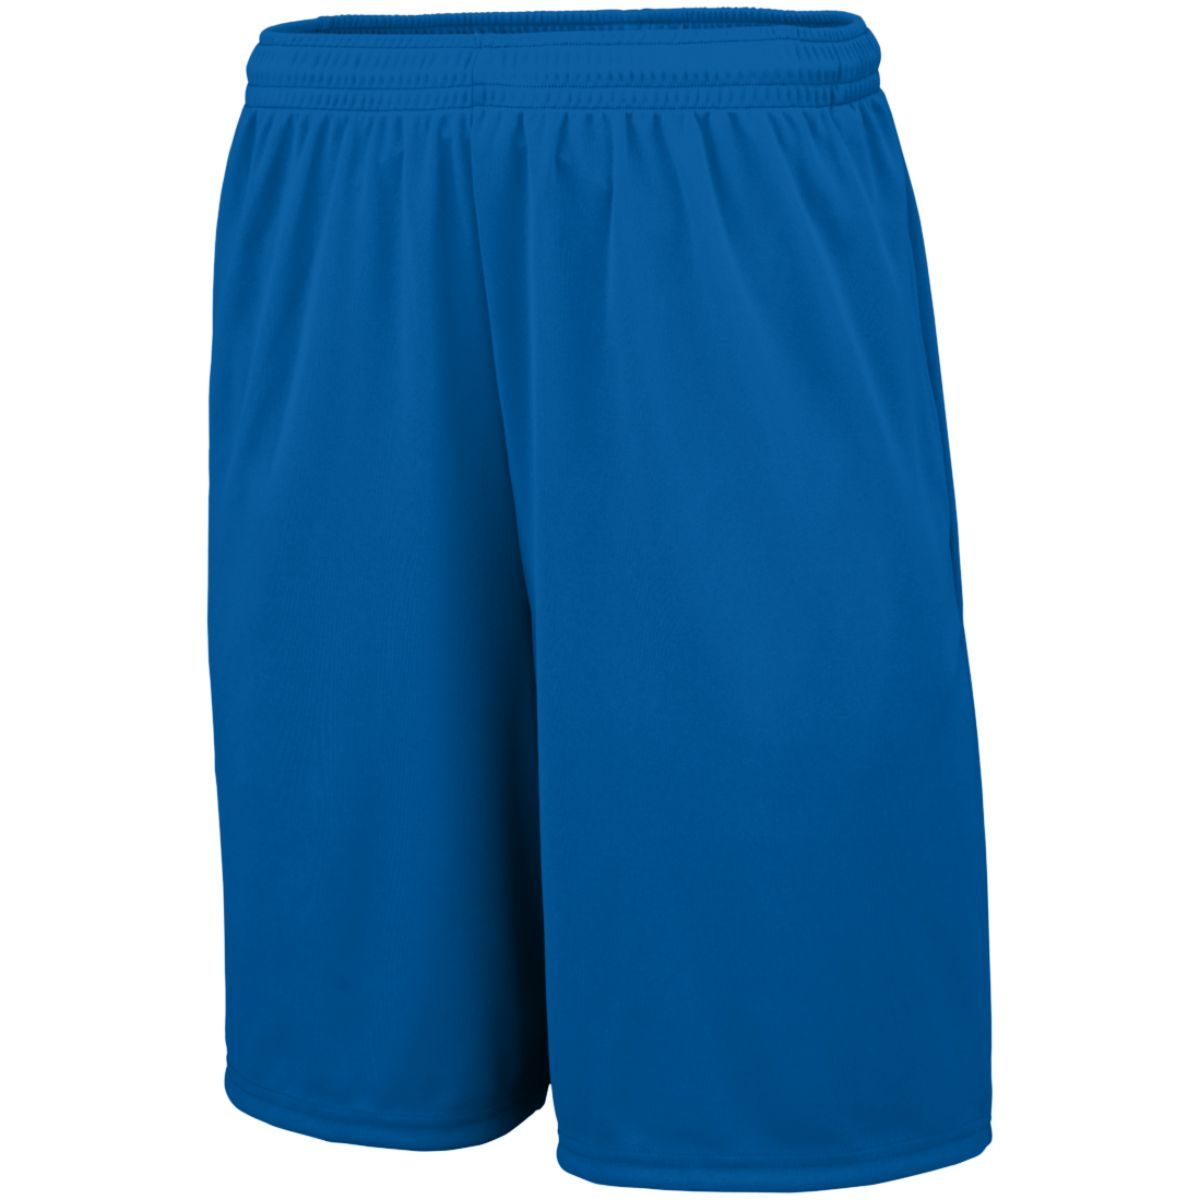 Augusta Sportswear Training Shorts With Pockets in Royal  -Part of the Adult, Adult-Shorts, Augusta-Products, Lacrosse, All-Sports, All-Sports-1 product lines at KanaleyCreations.com